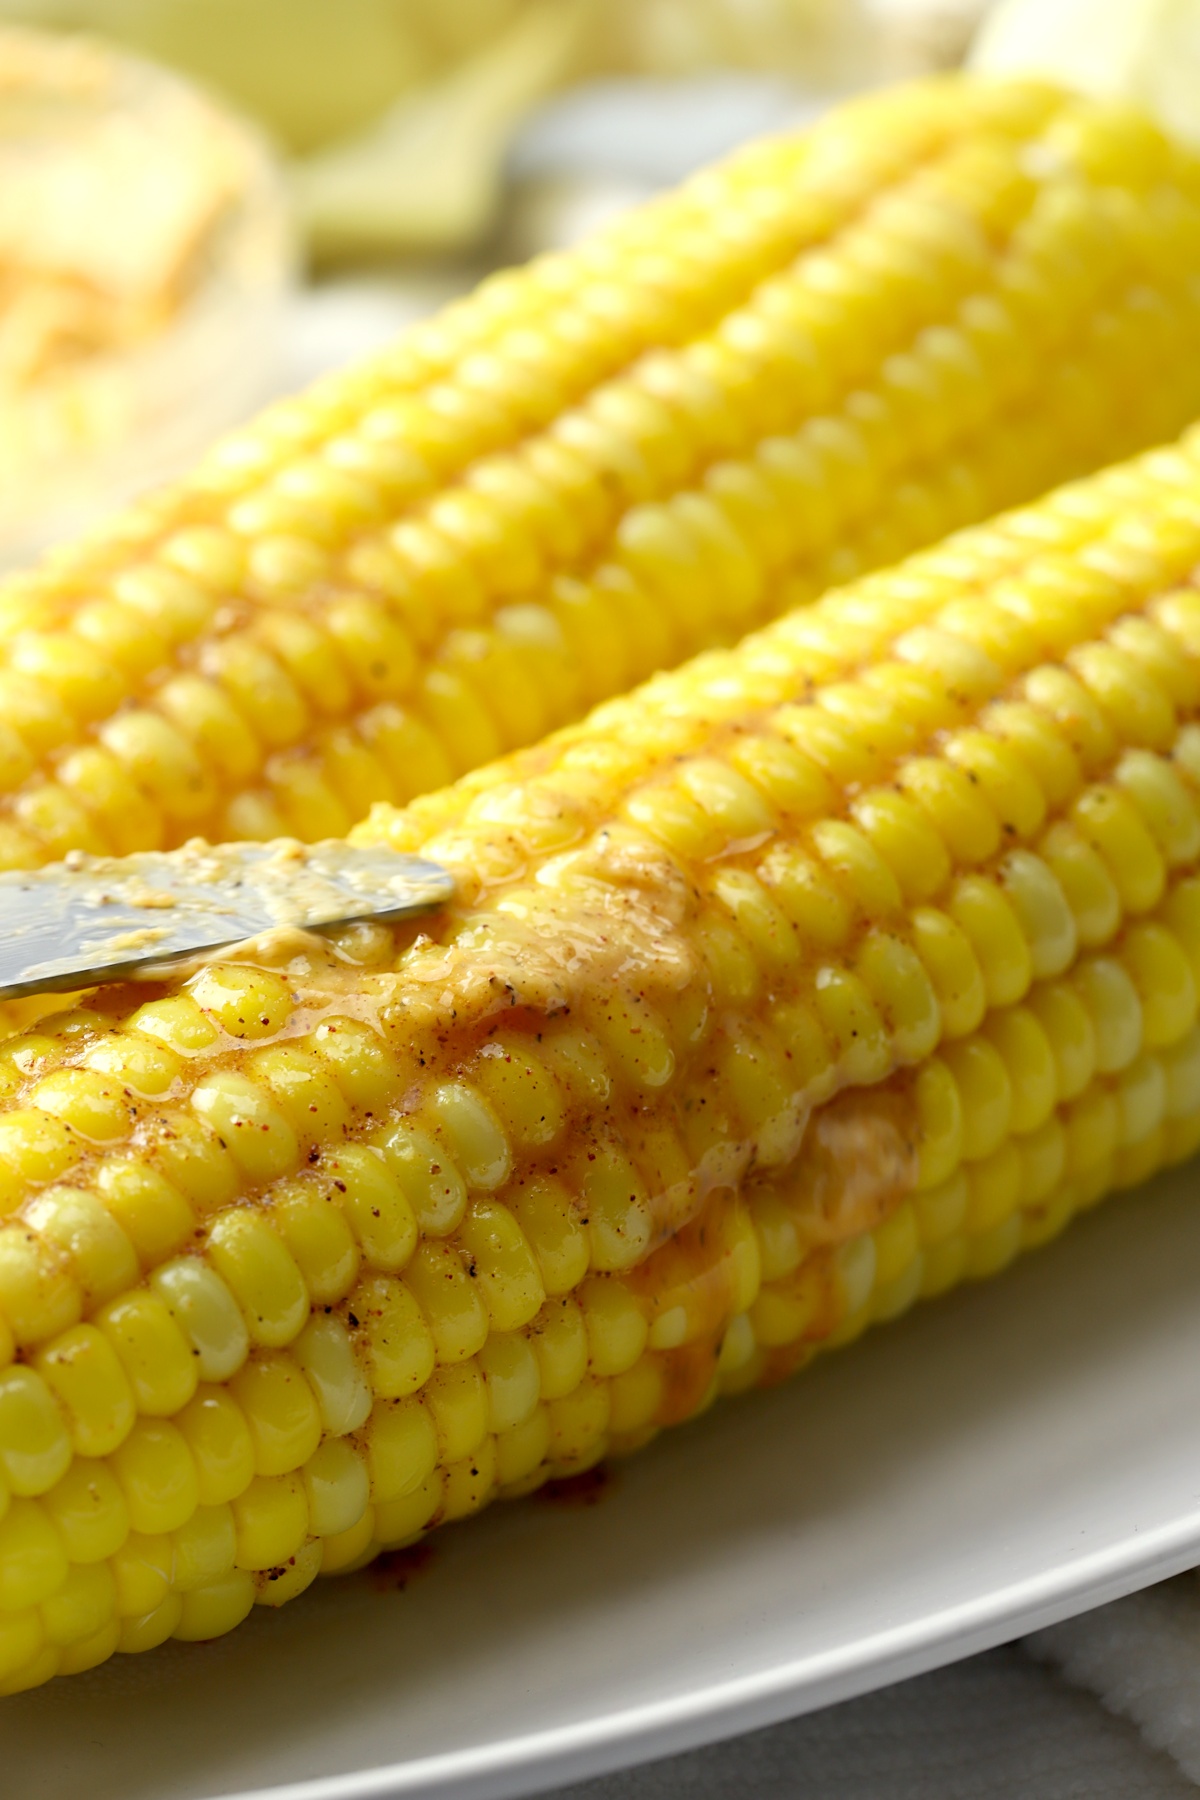 Knife spreads melted butter over oven roasted corn on the cob on a plate.